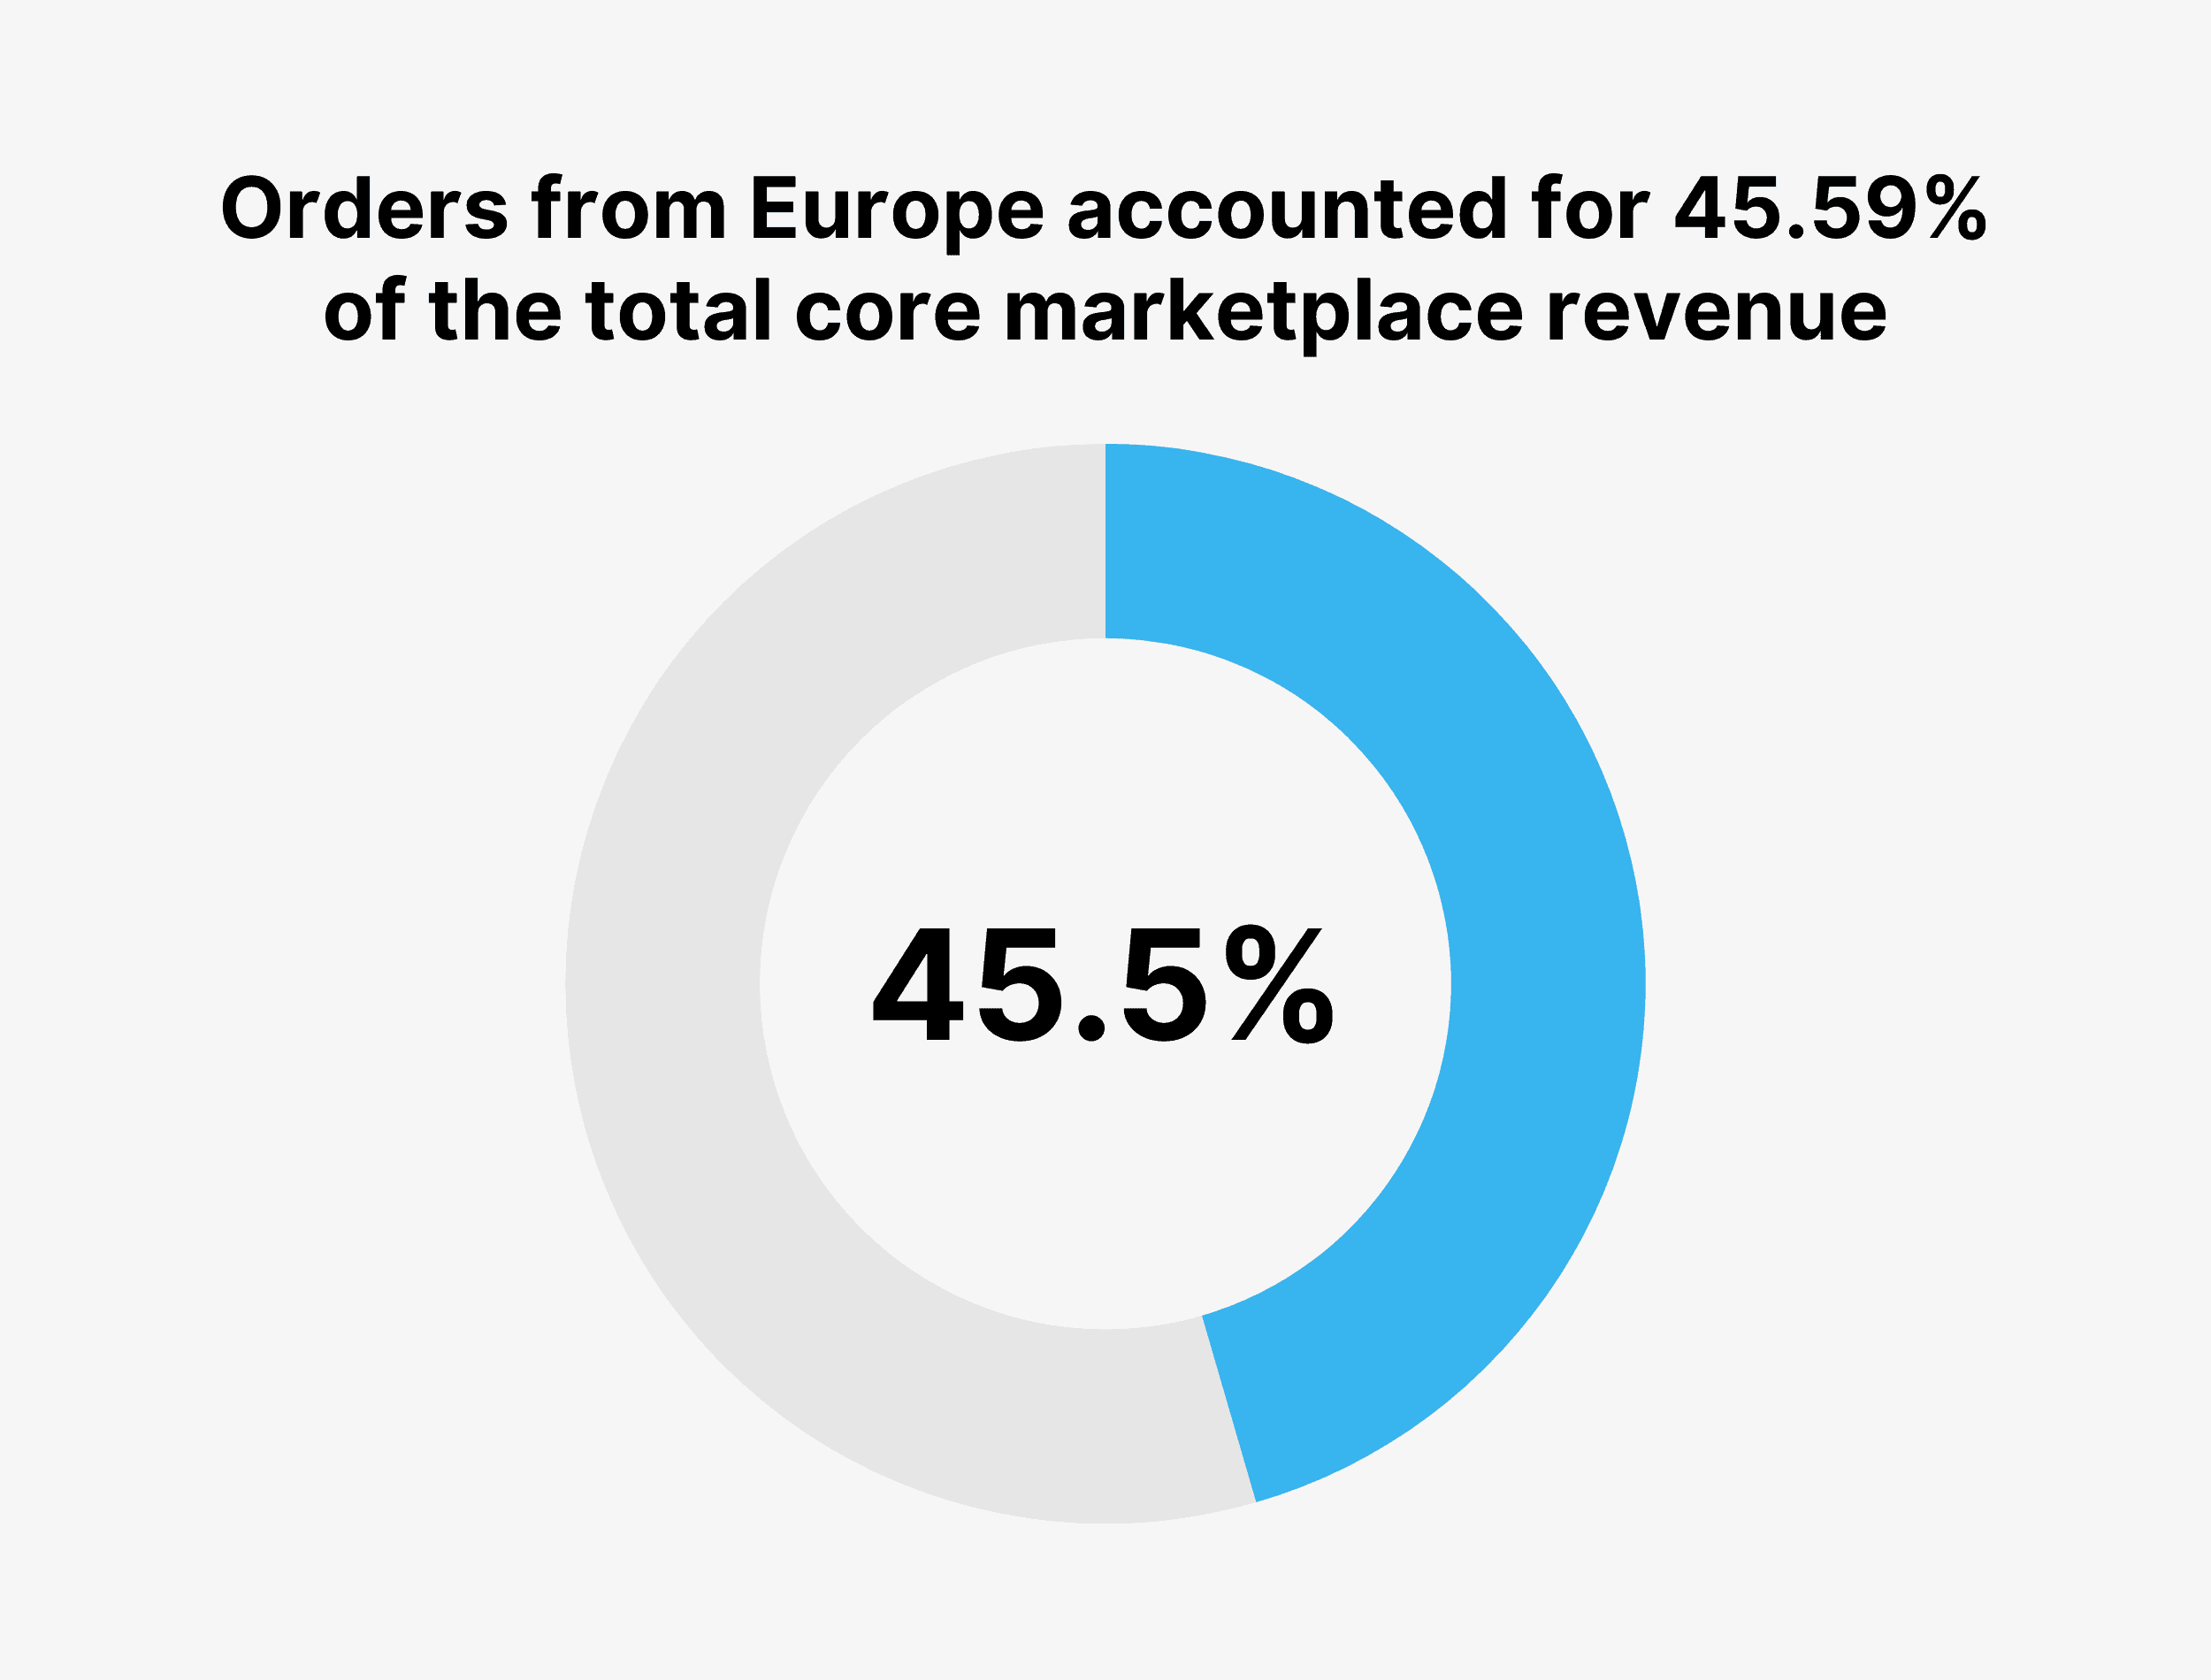 Orders from Europe accounted for 45.59% of the total core marketplace revenue